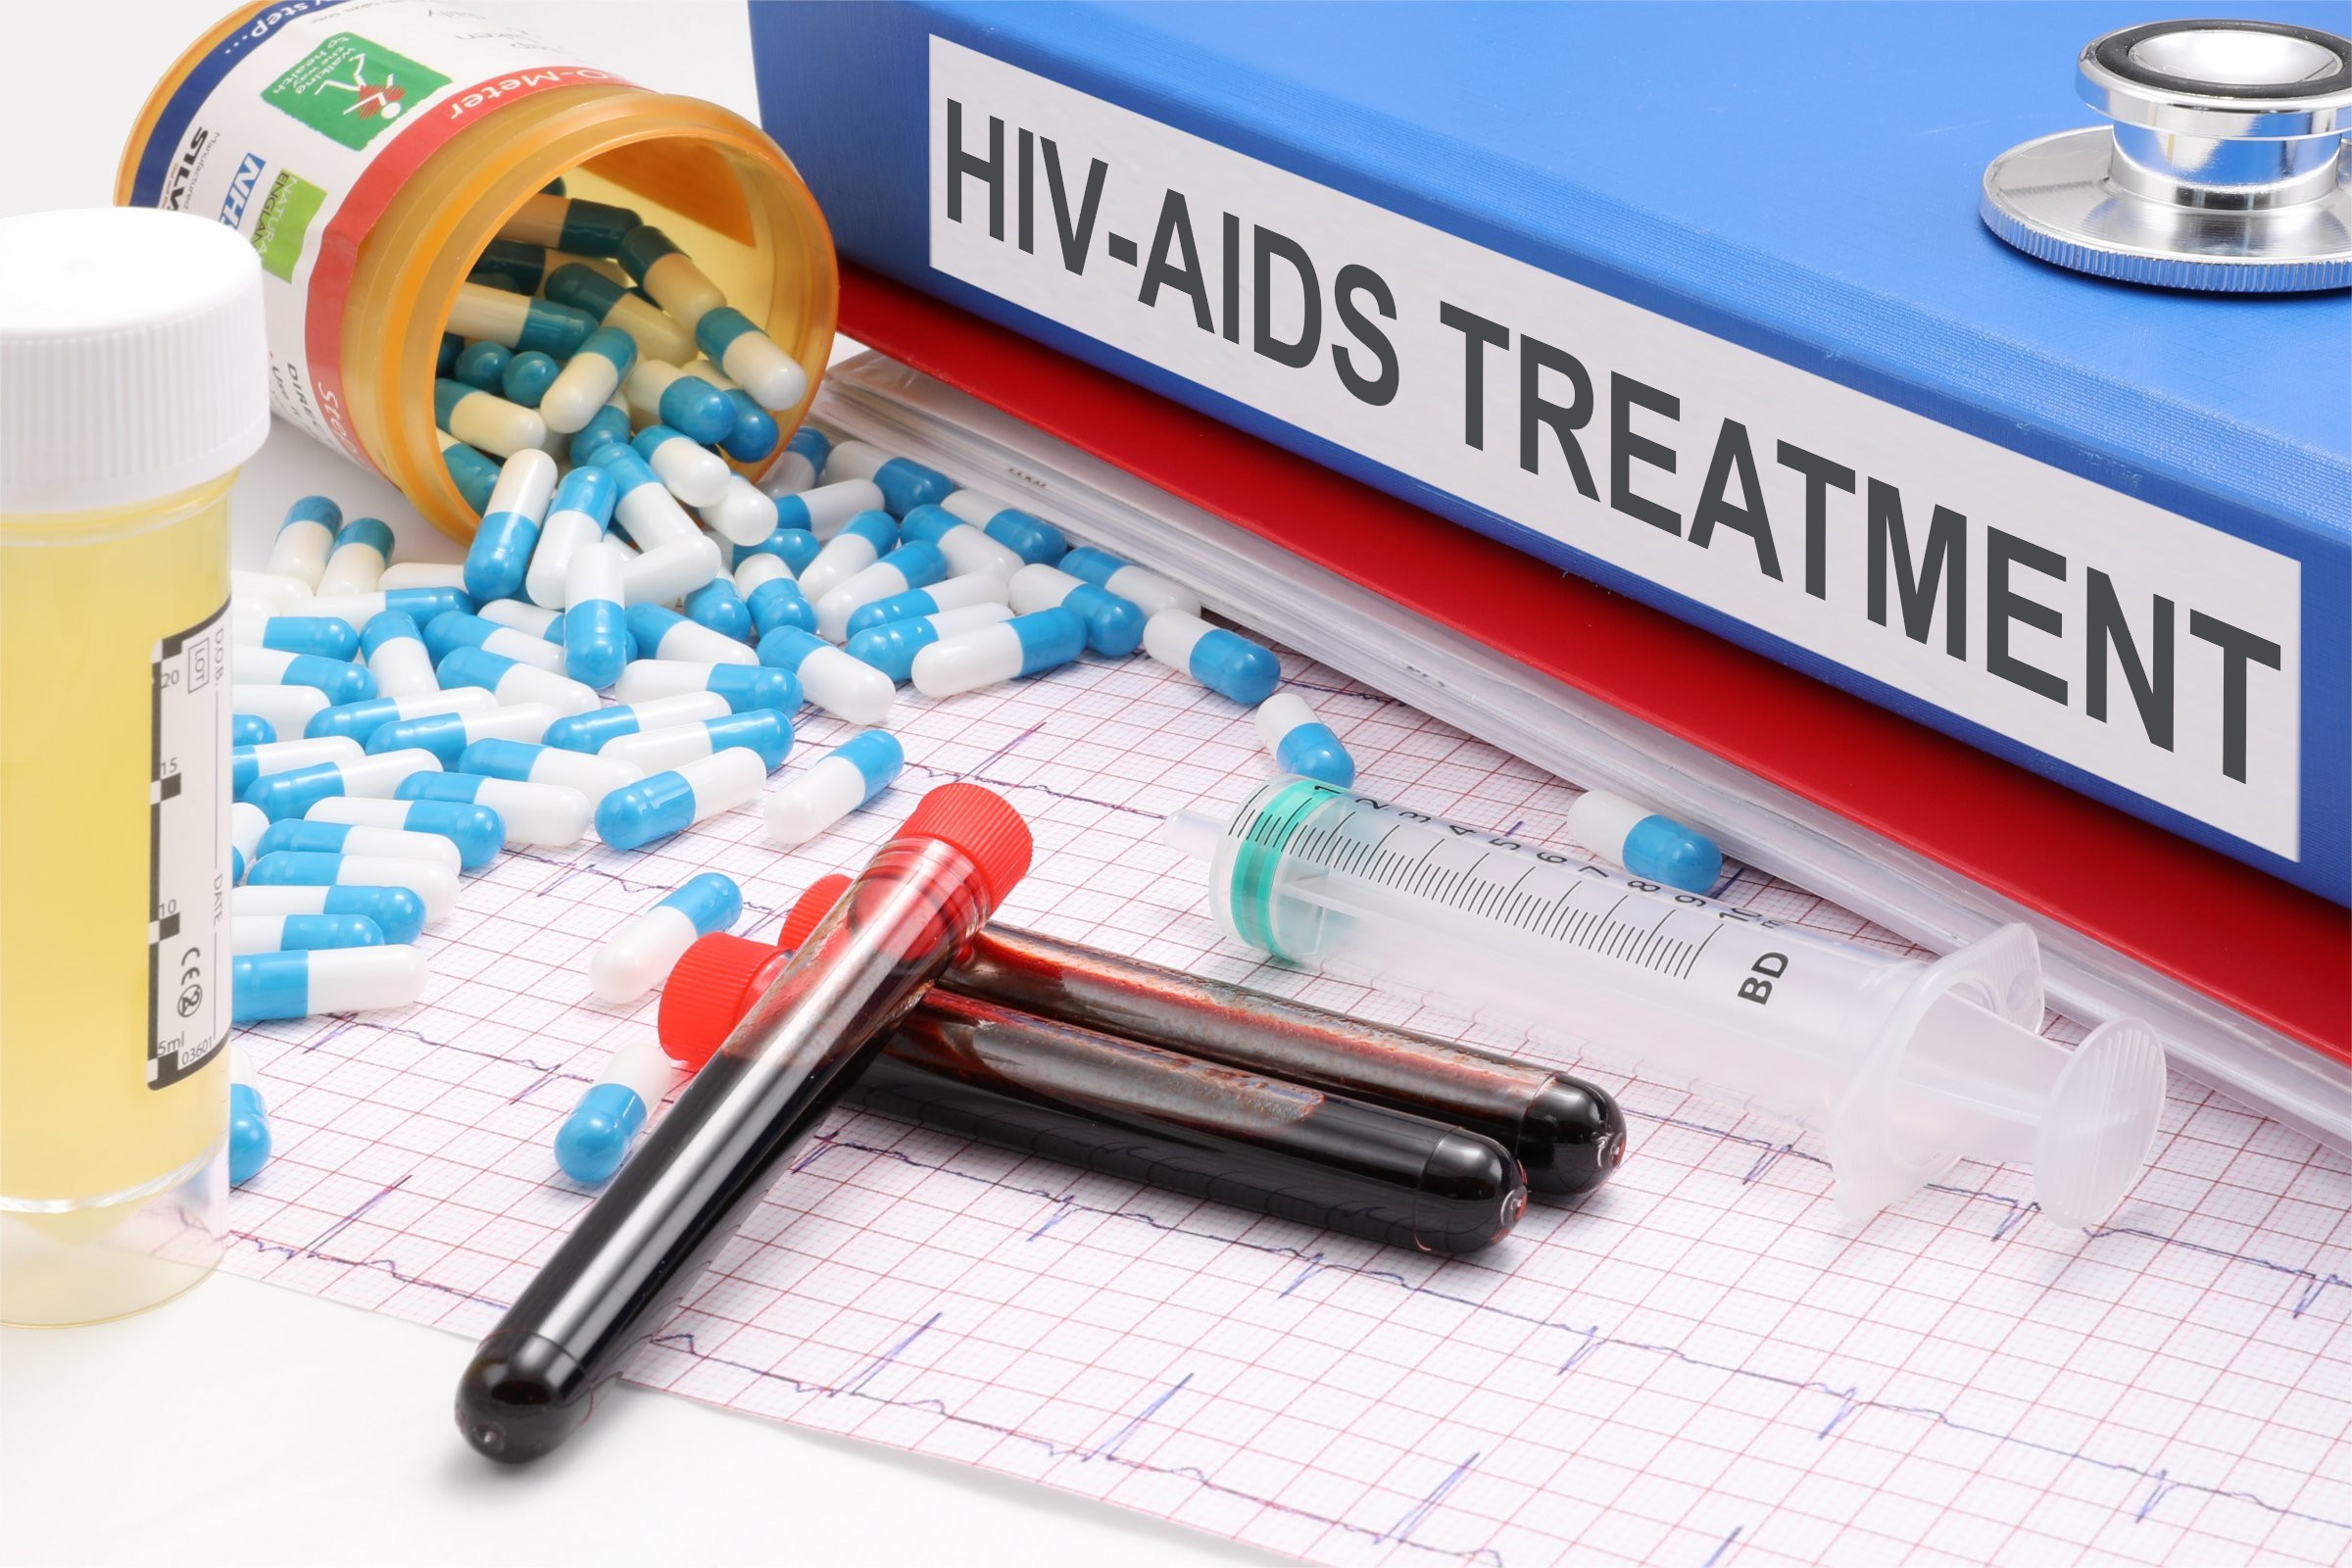 hiv-aids-treatment-free-of-charge-creative-commons-medical-image